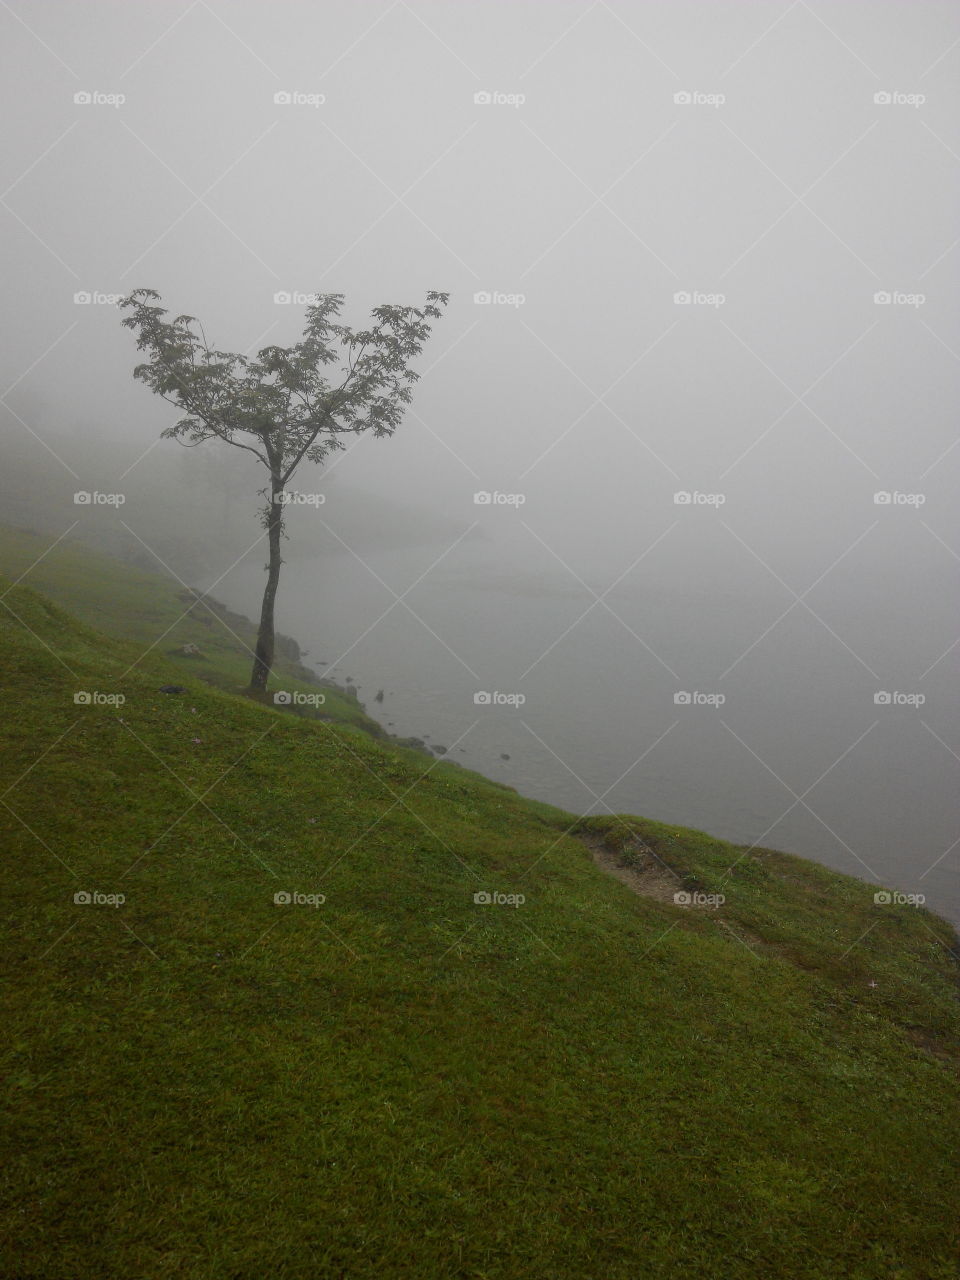 The tree of the lake in the mist. Photo taken at Lagos de Covadonga in Asturias(Spain)